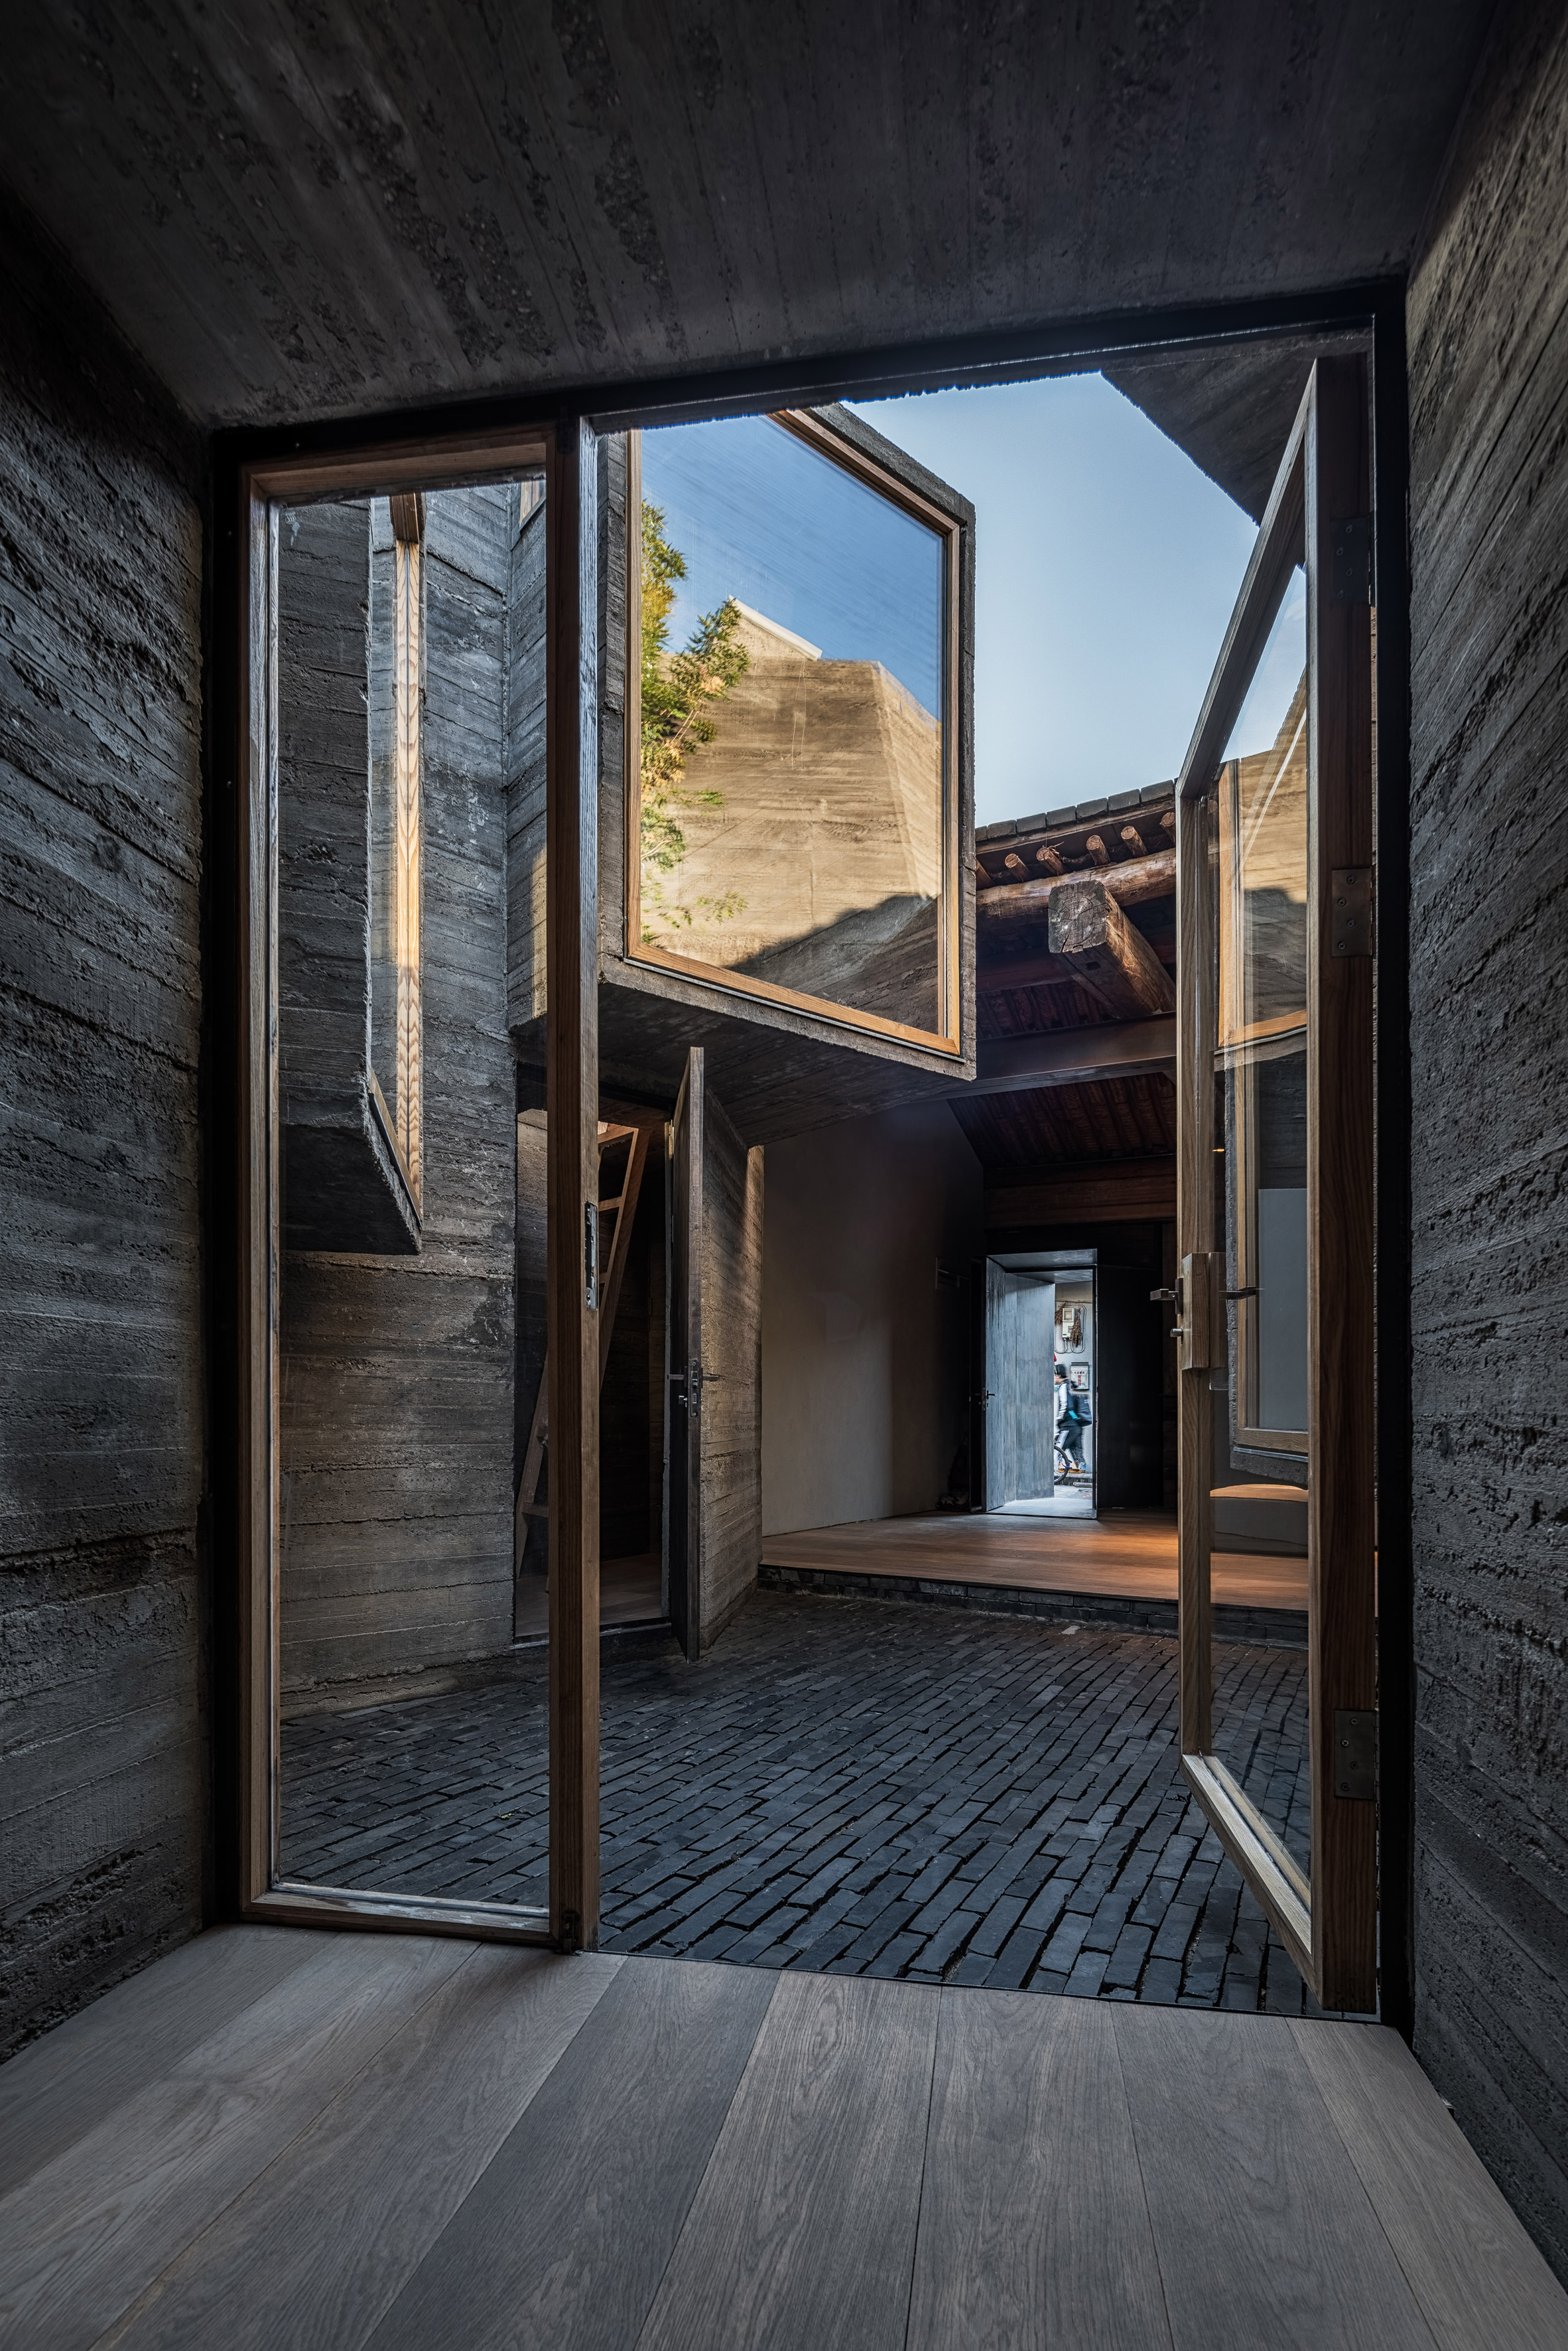 Micro-Hutong by ZAO/standardarchitecture